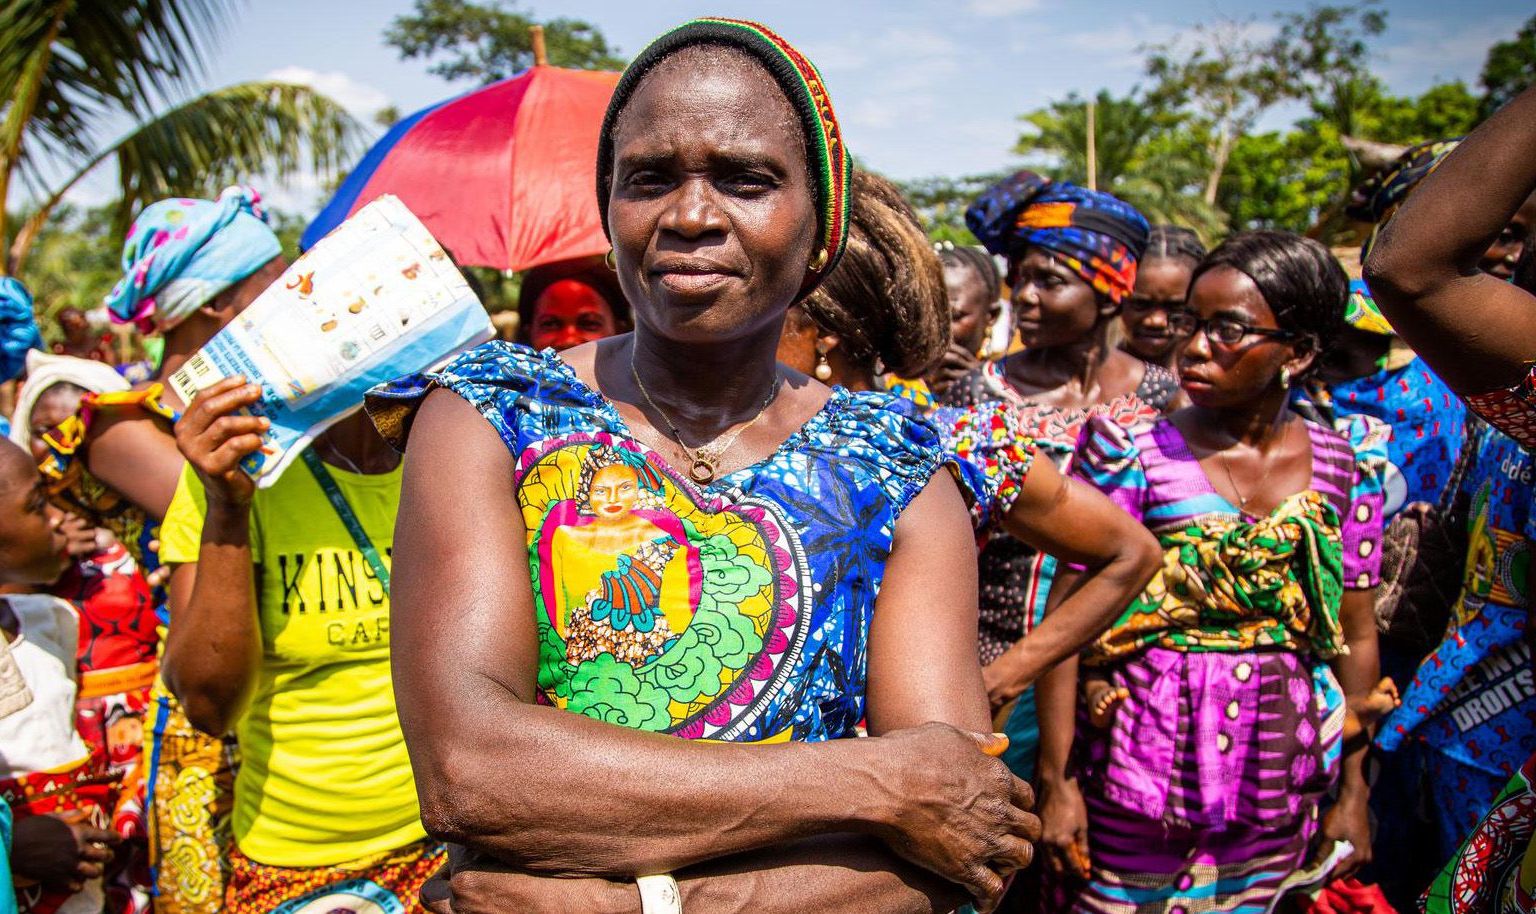 On International Women's Day, 8 March, the women in Lokolo demonstrate for their rights.